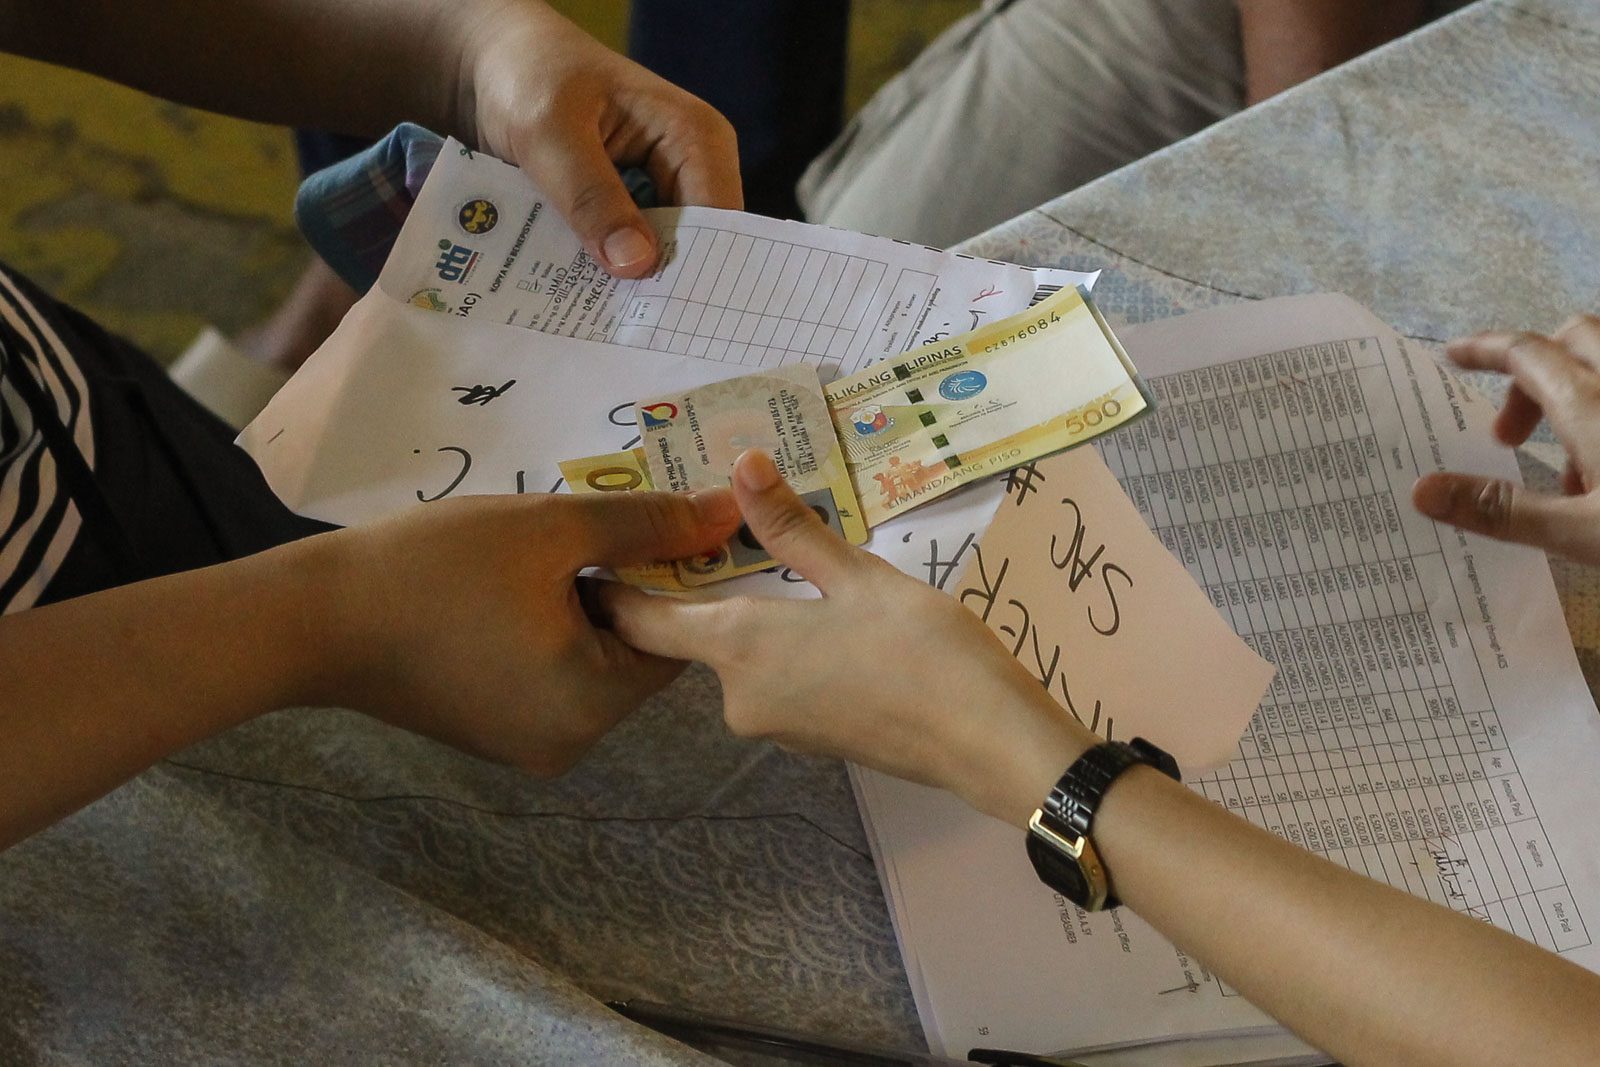 23 barangay officials face criminal charges over cash aid distribution